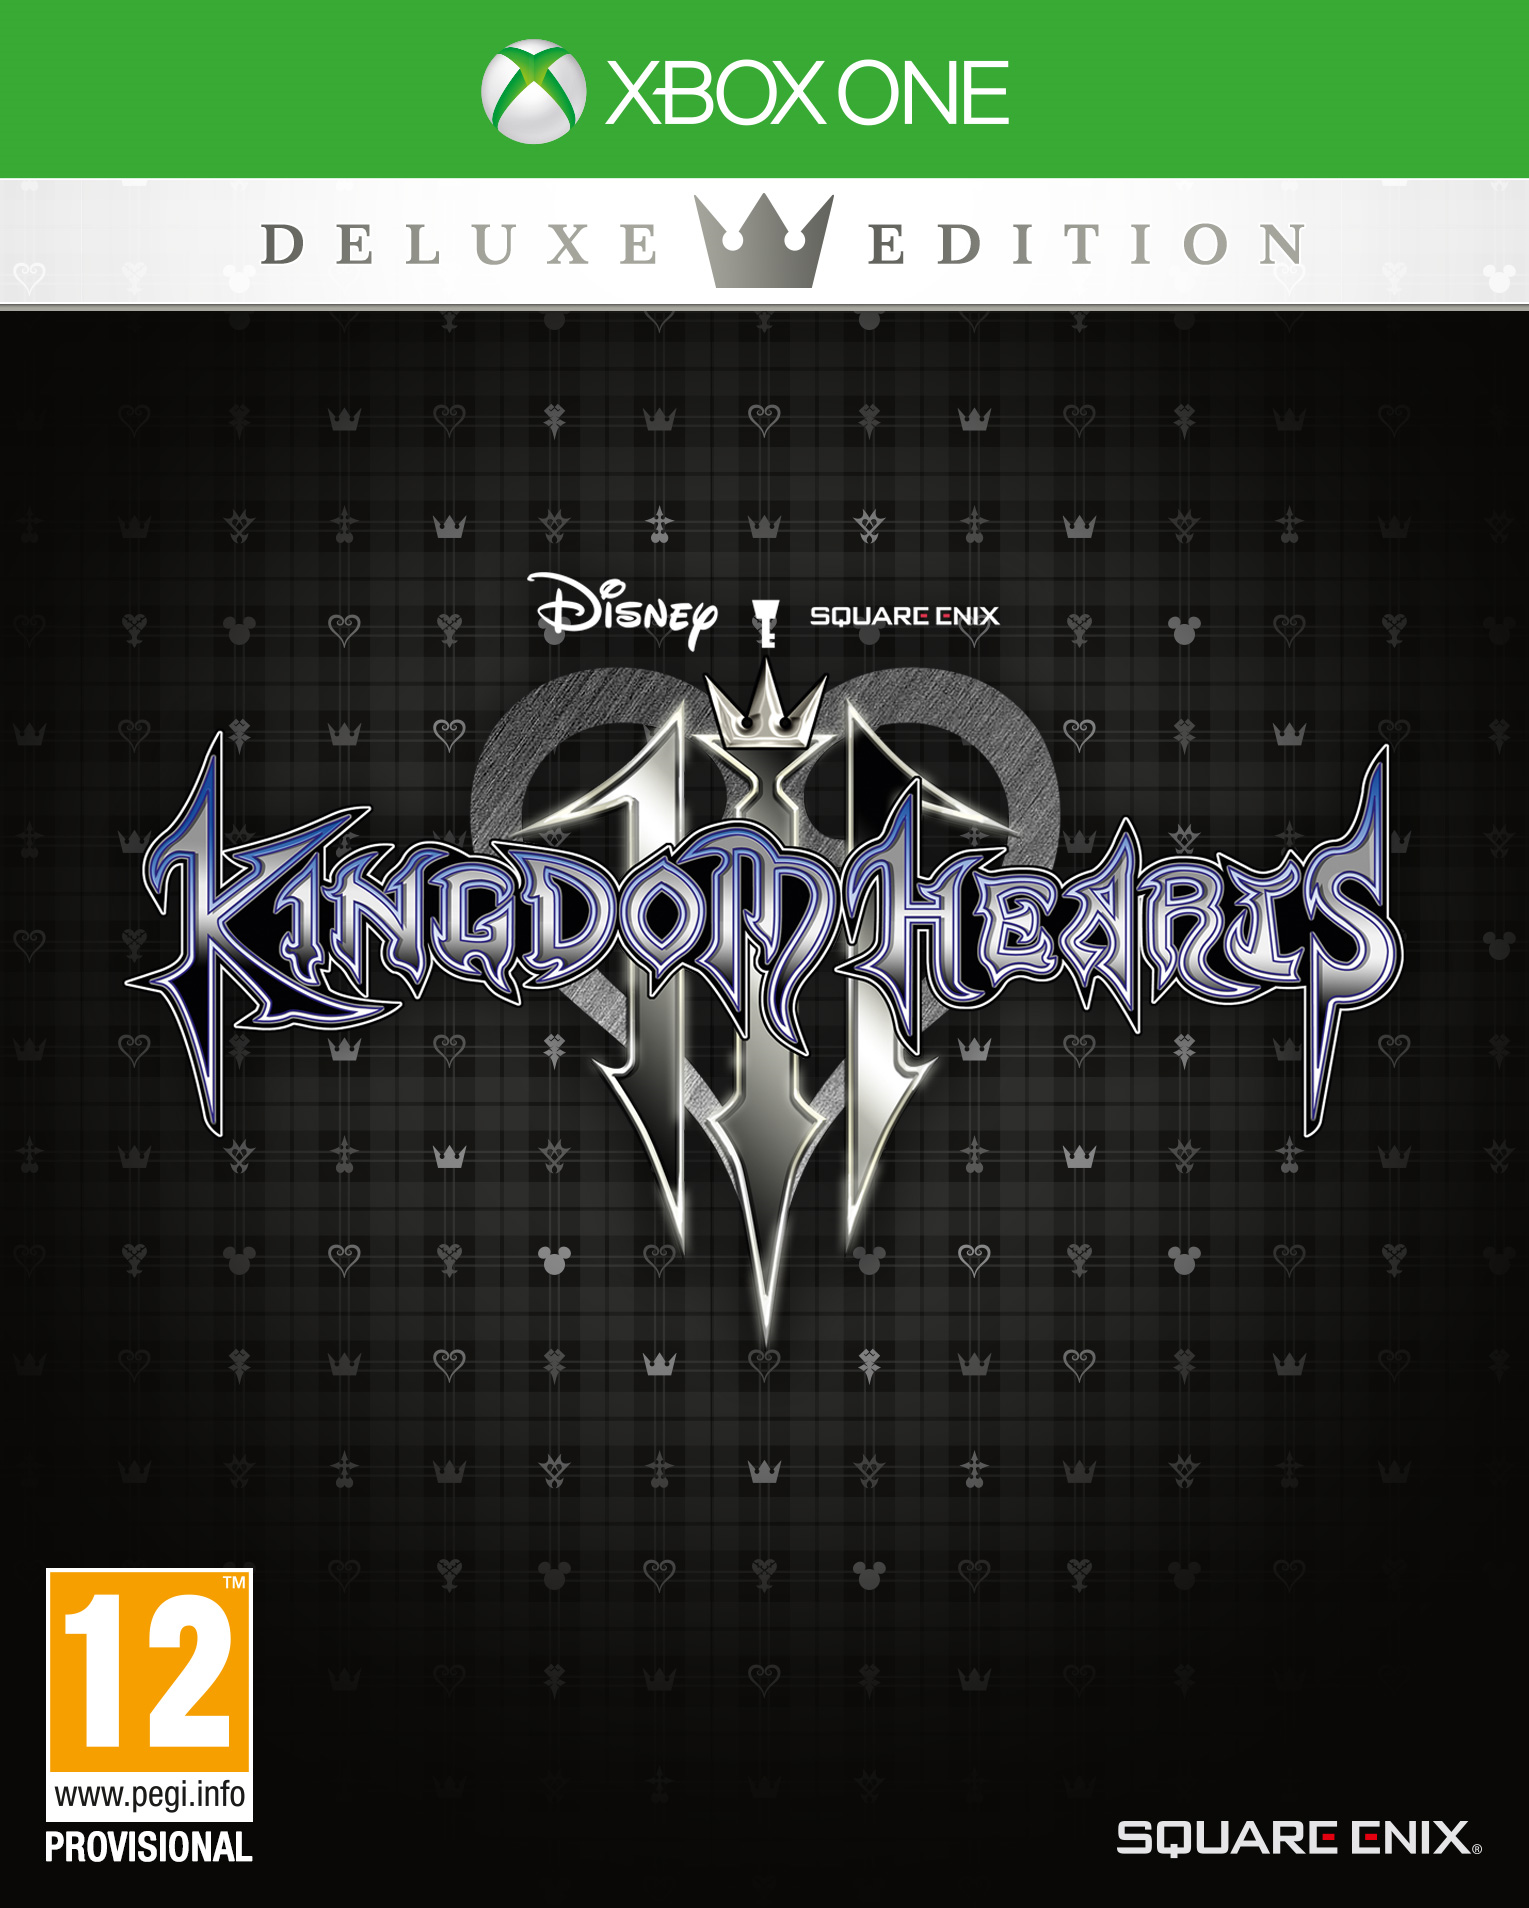 Aanbieding Square Enix Kingdom Hearts 3 (deluxe Edition) Xbox One - 5021290068940